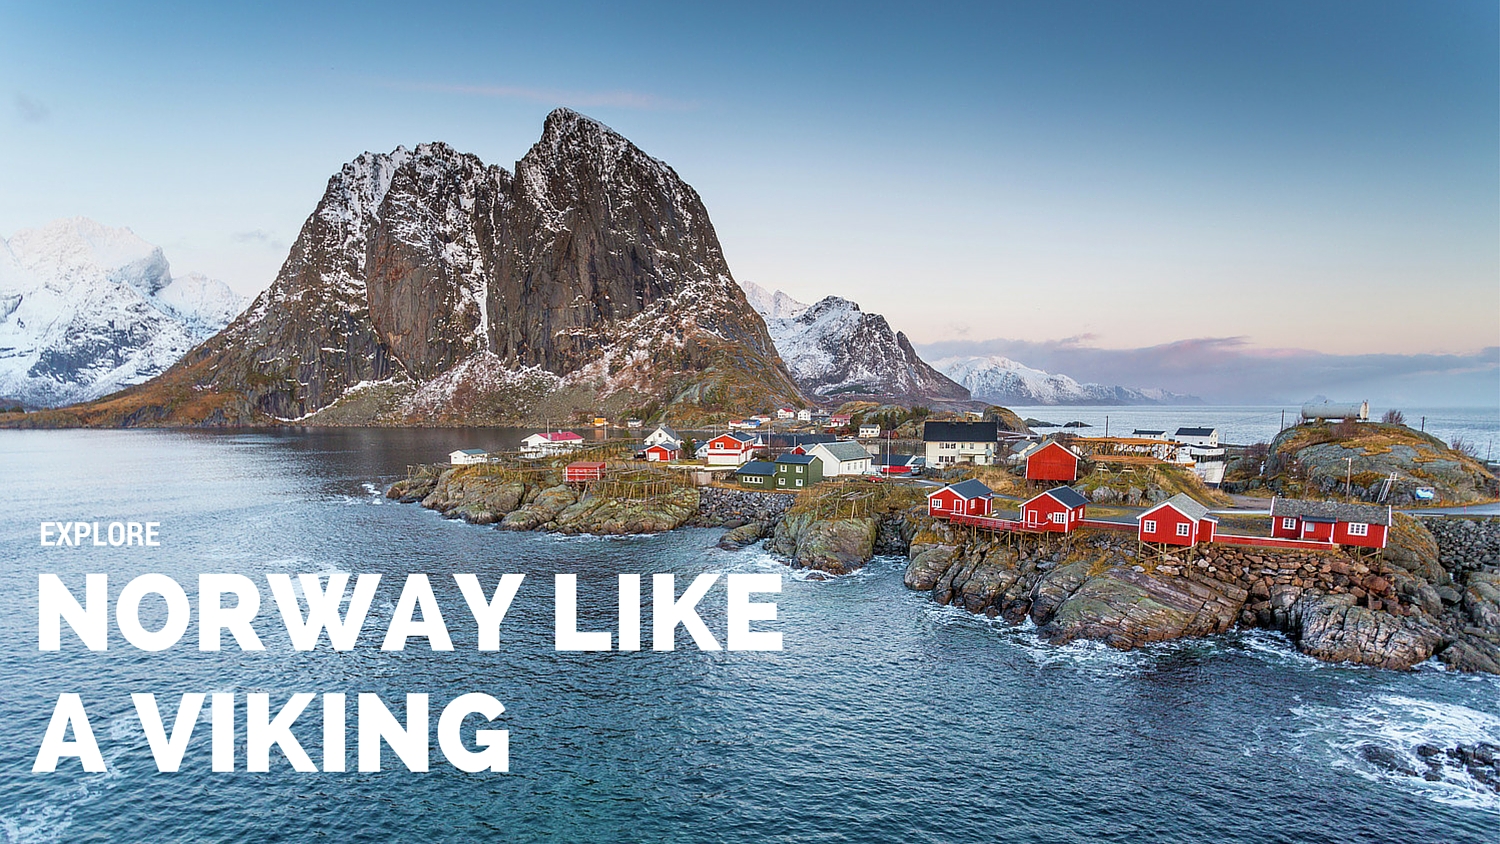 Explore Norway Like a Viking in the Winter Mountains of the Lofoten Islands